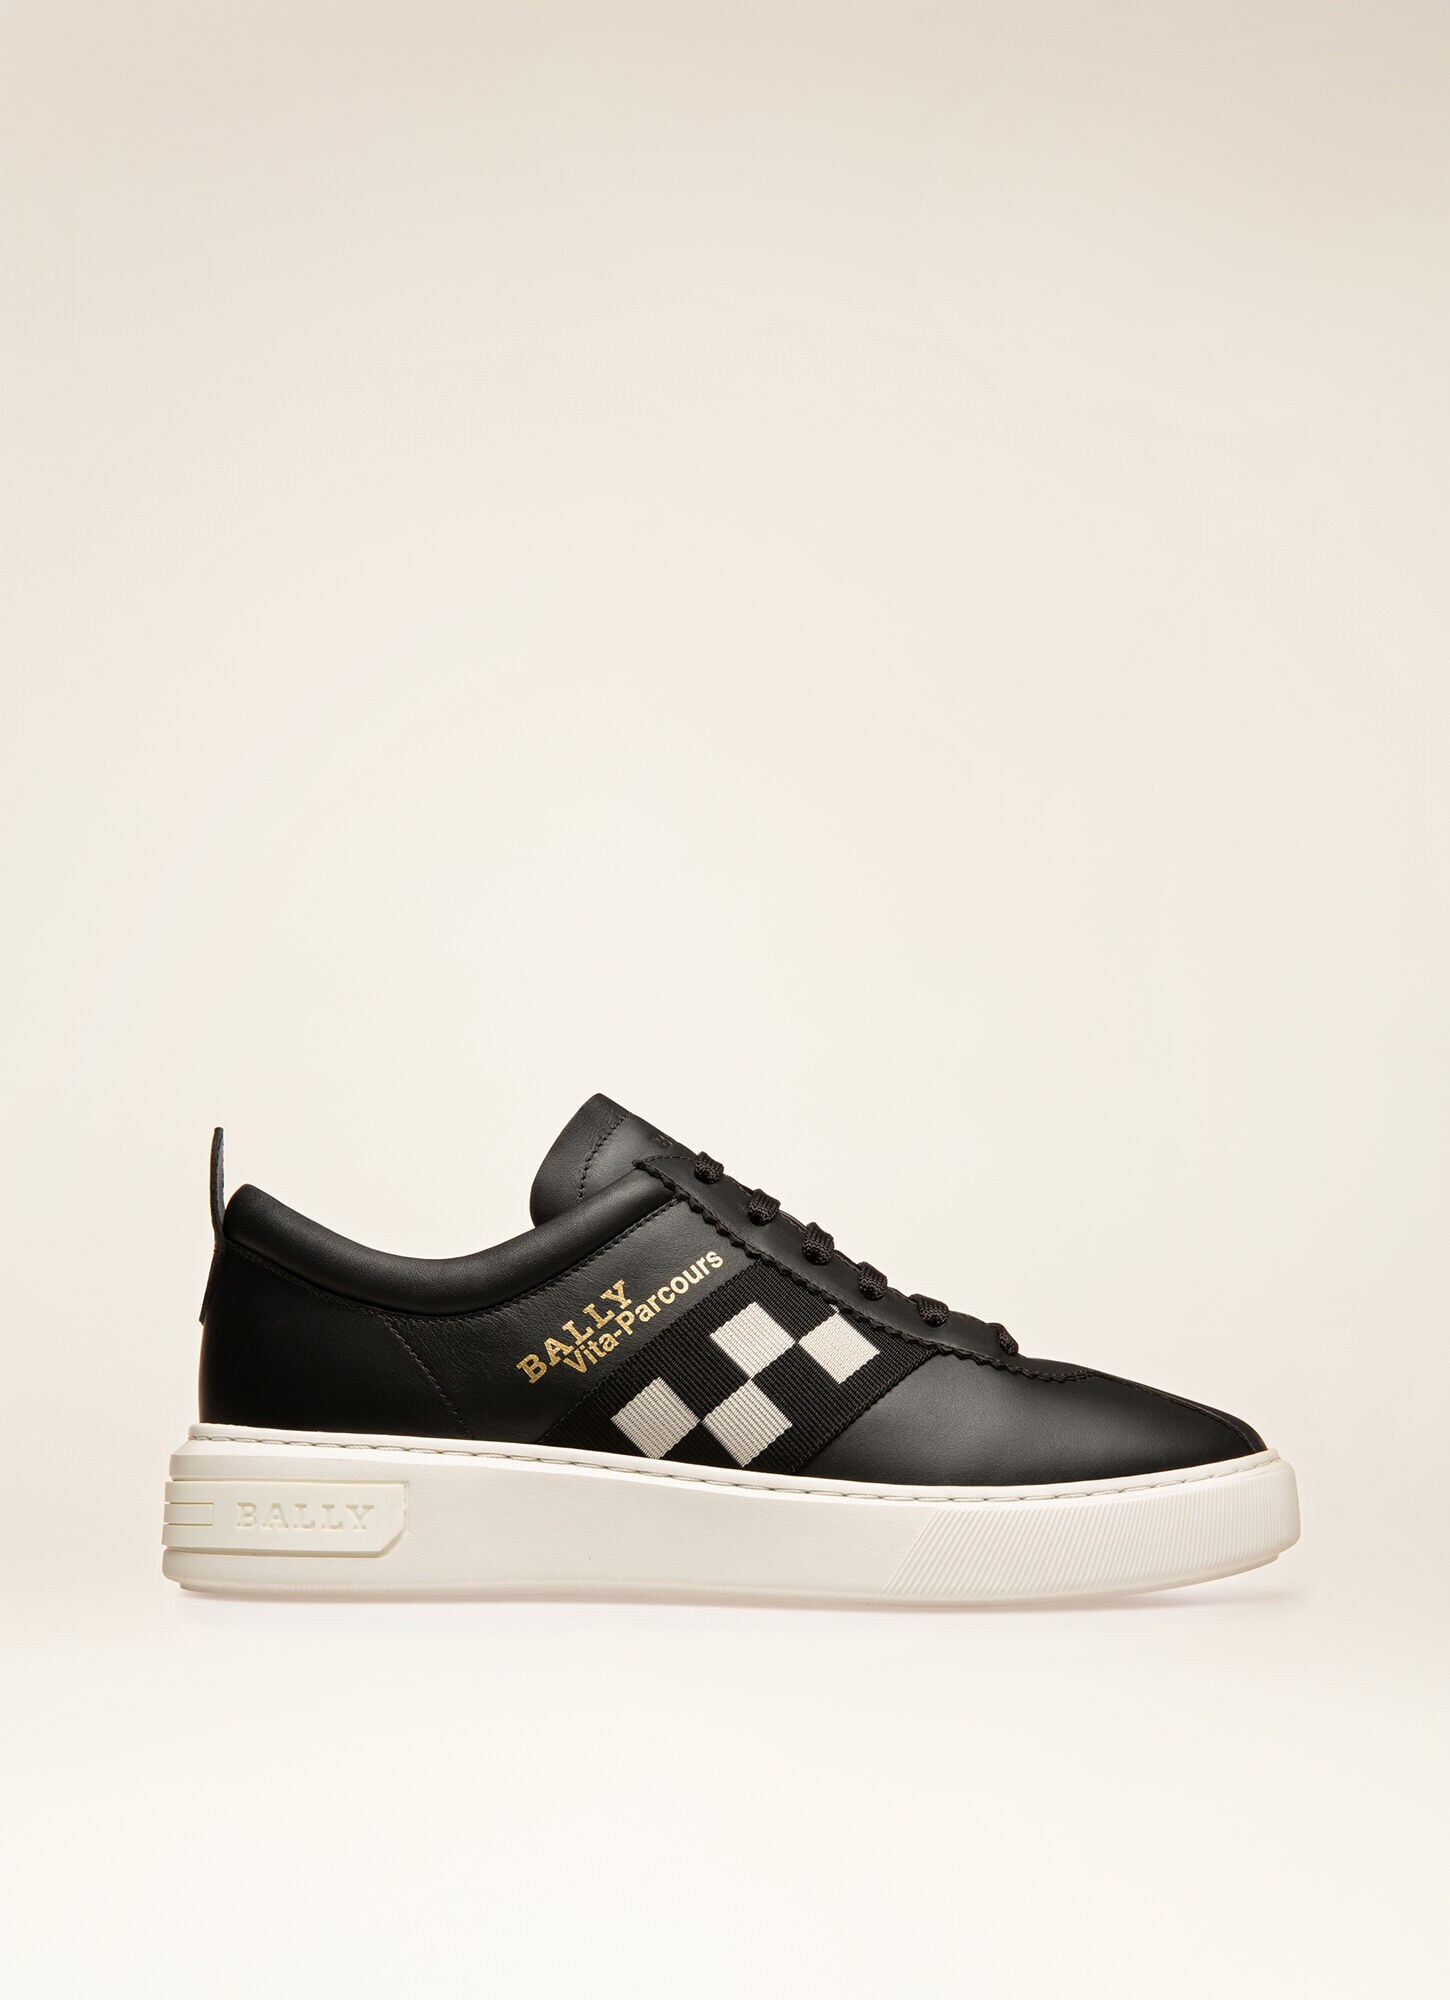 Vita Parcours | Mens Sneakers | Black Leather | Bally